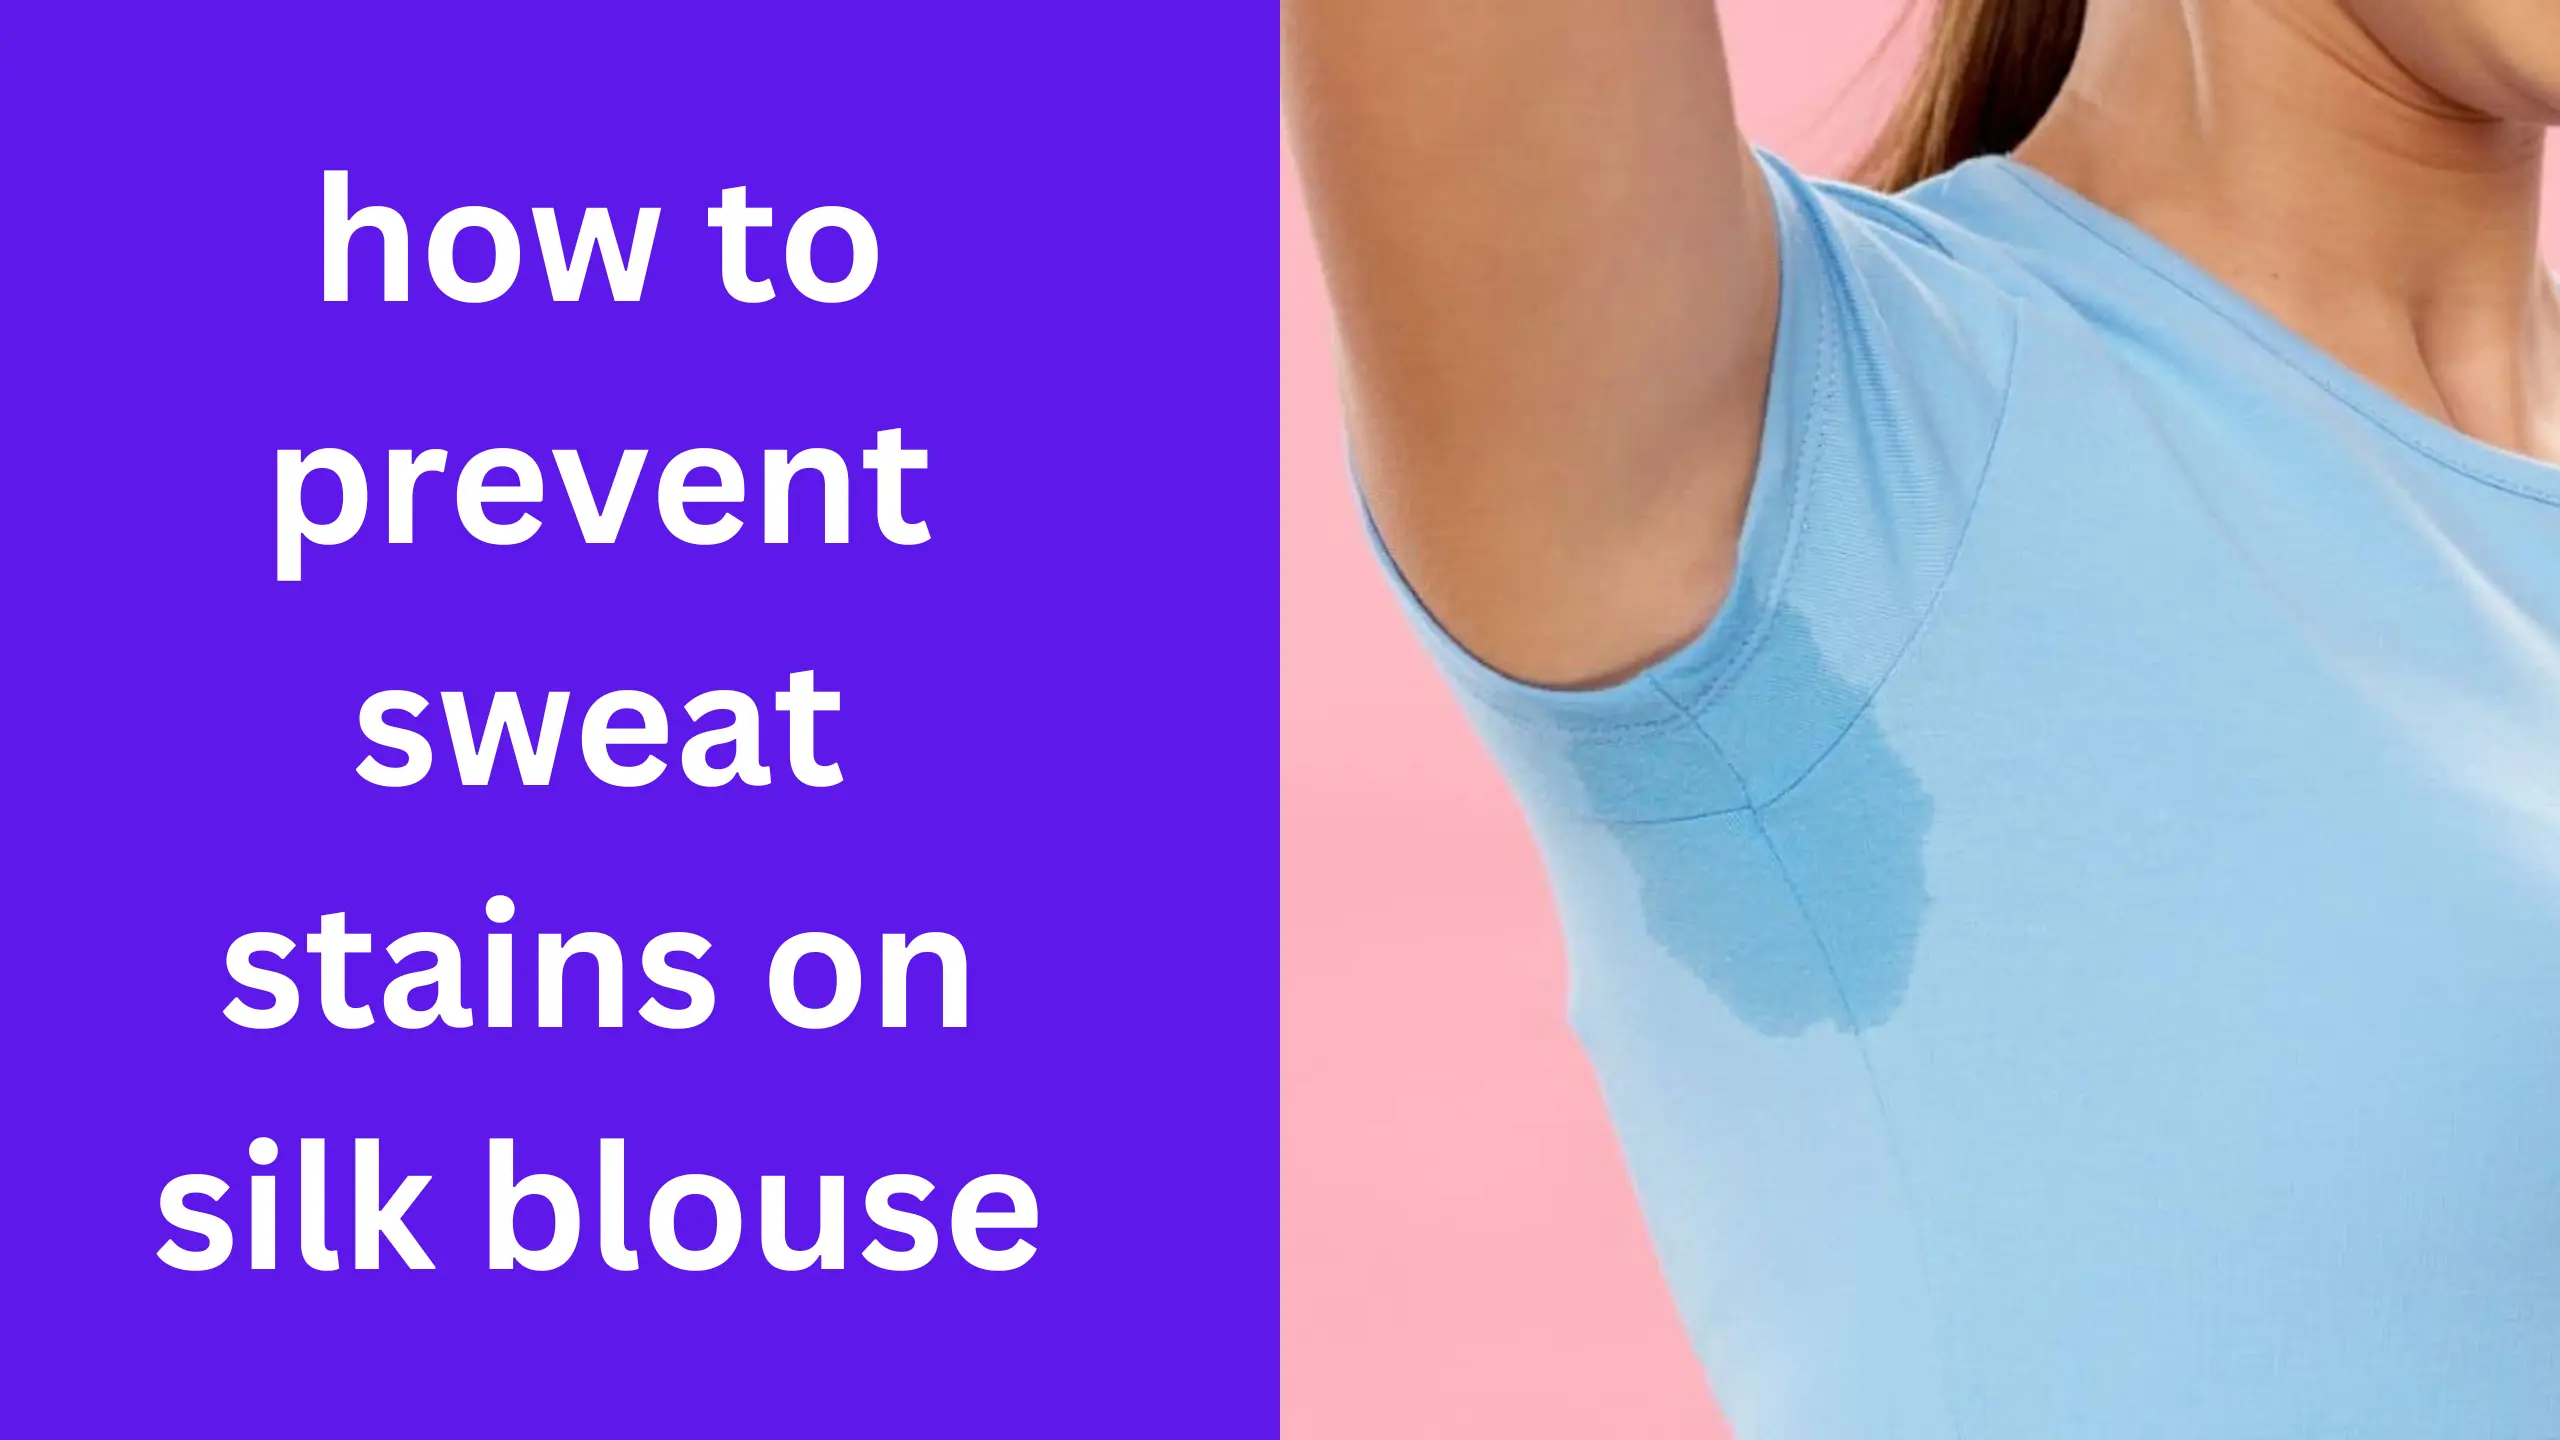 how to prevent sweat stains on silk blouse